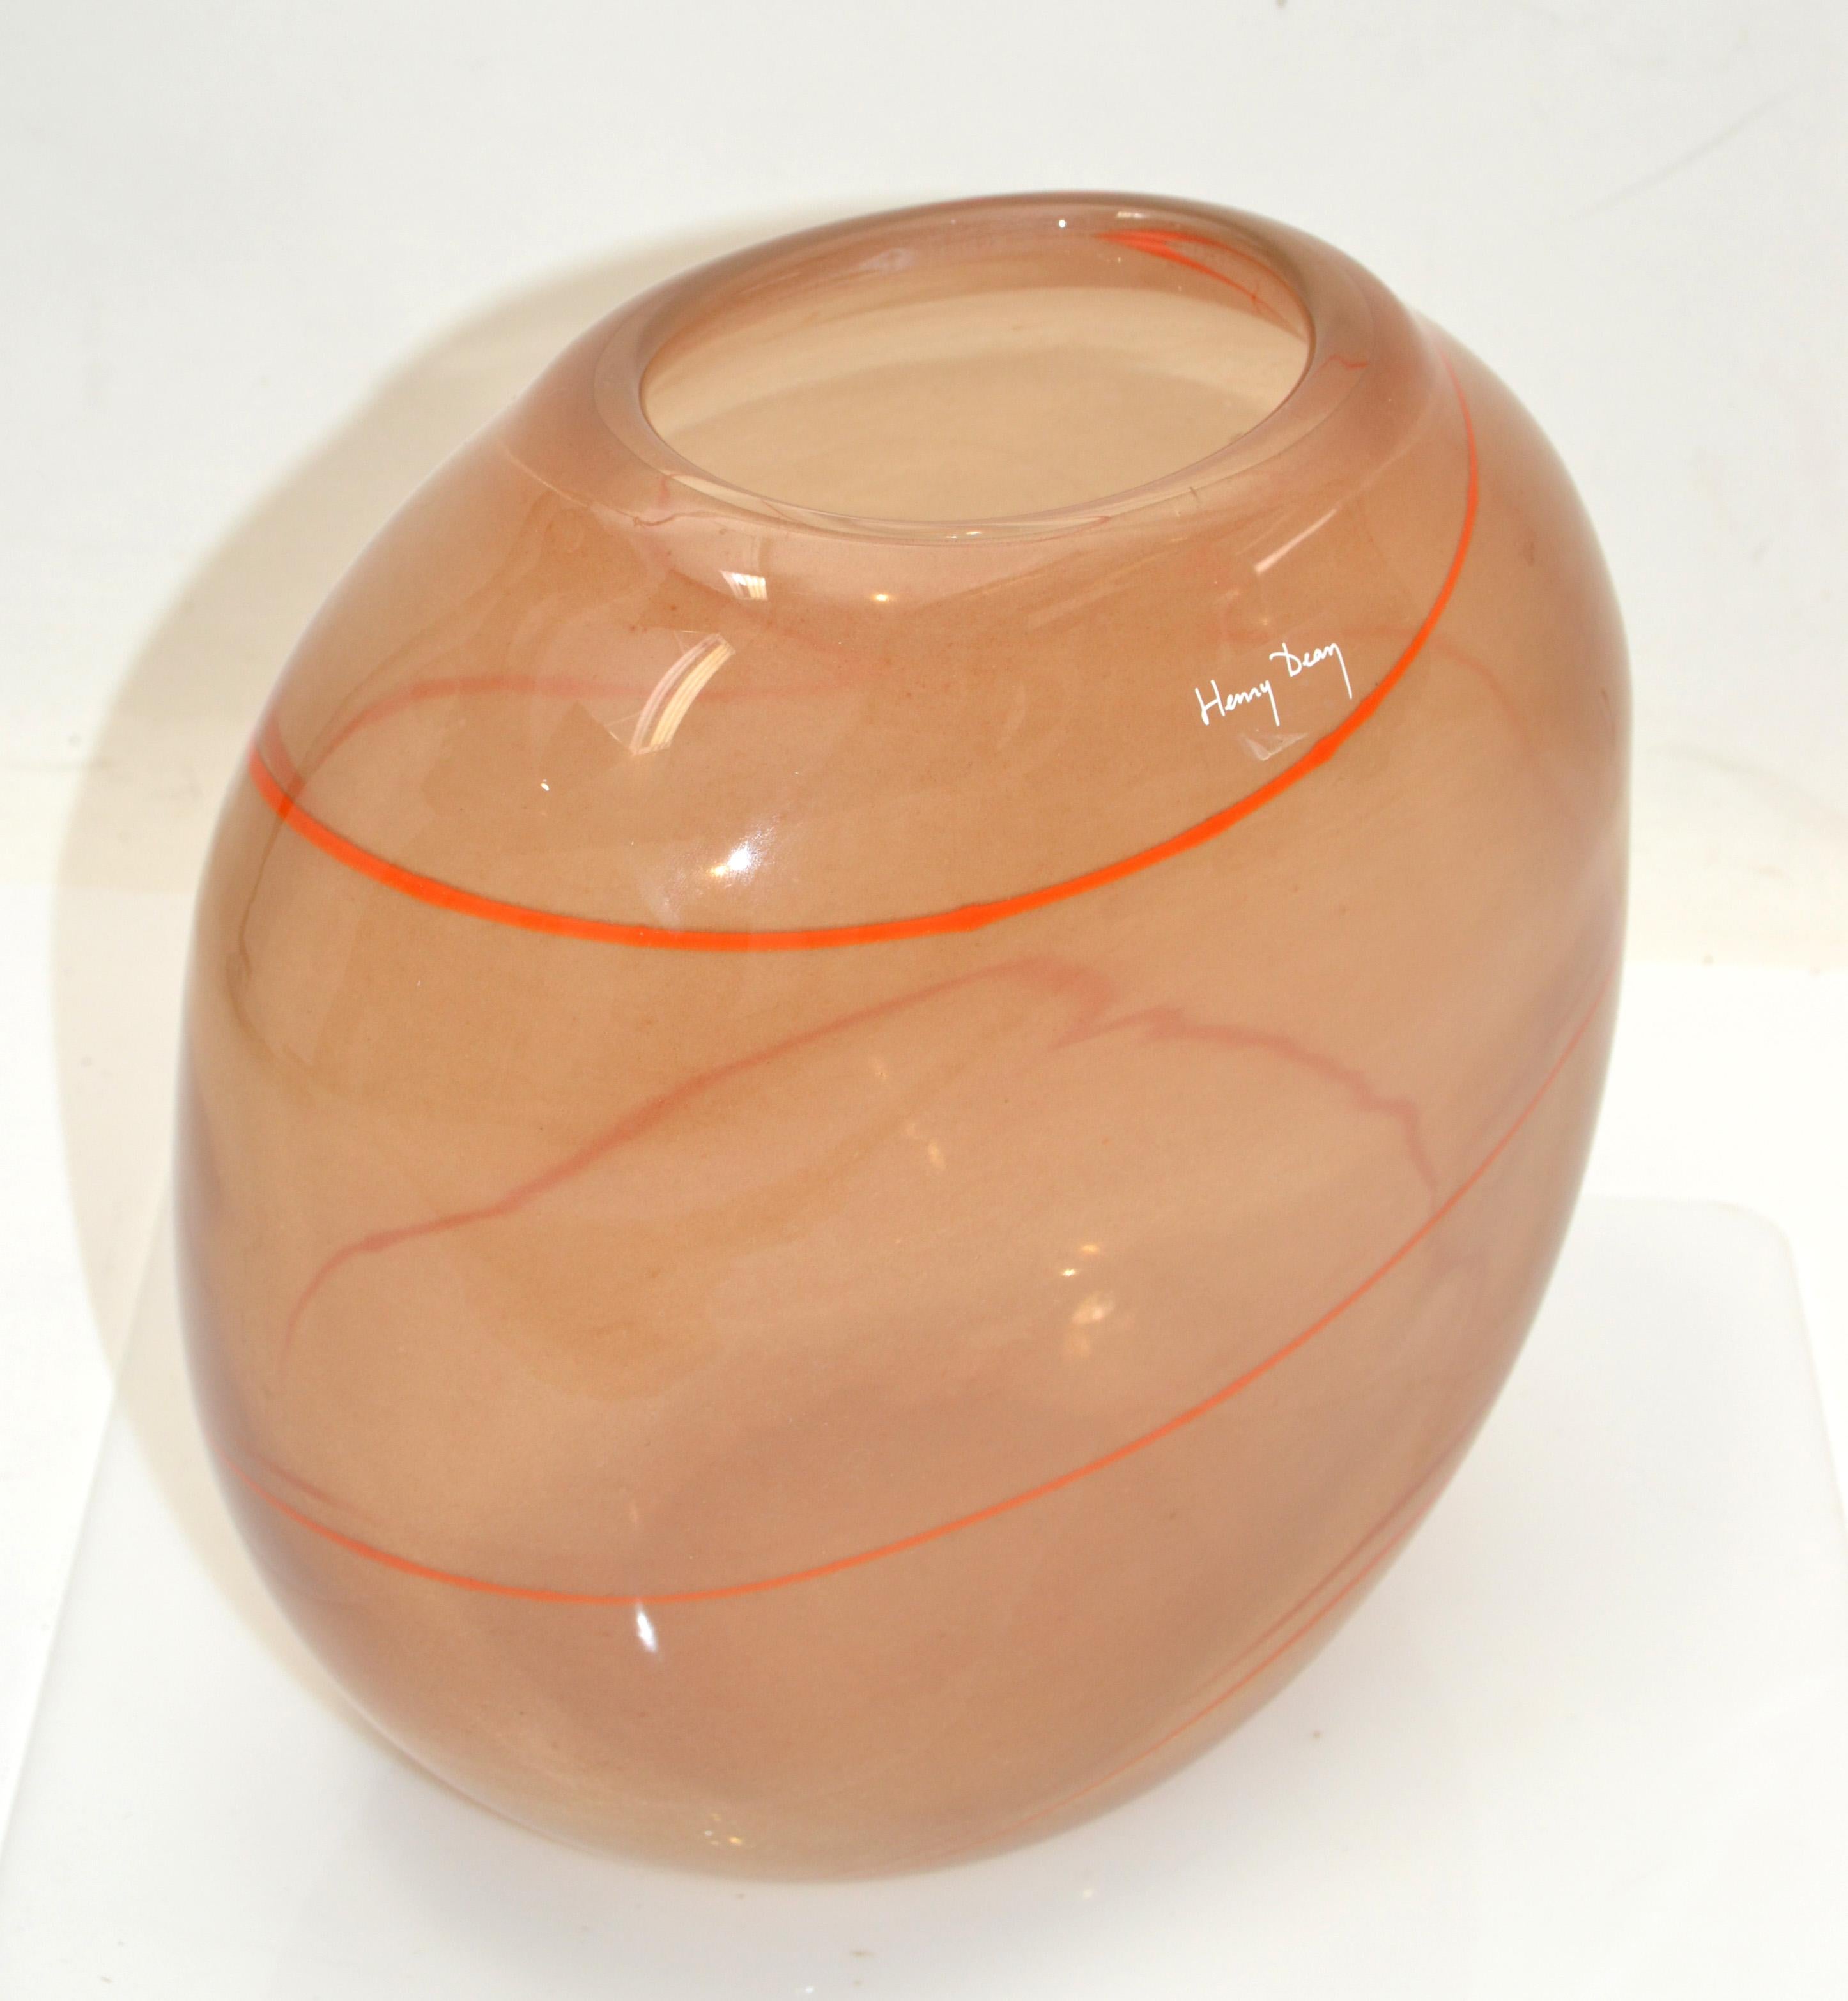 Henry Dean European Mid-Century Modern striking apricot and orange blown art glass vase or bowl from Belgium.
This piece is very heavy and looks stunning from every angle.
Marked at the opening. The Opening measures 4 x 3 inches.